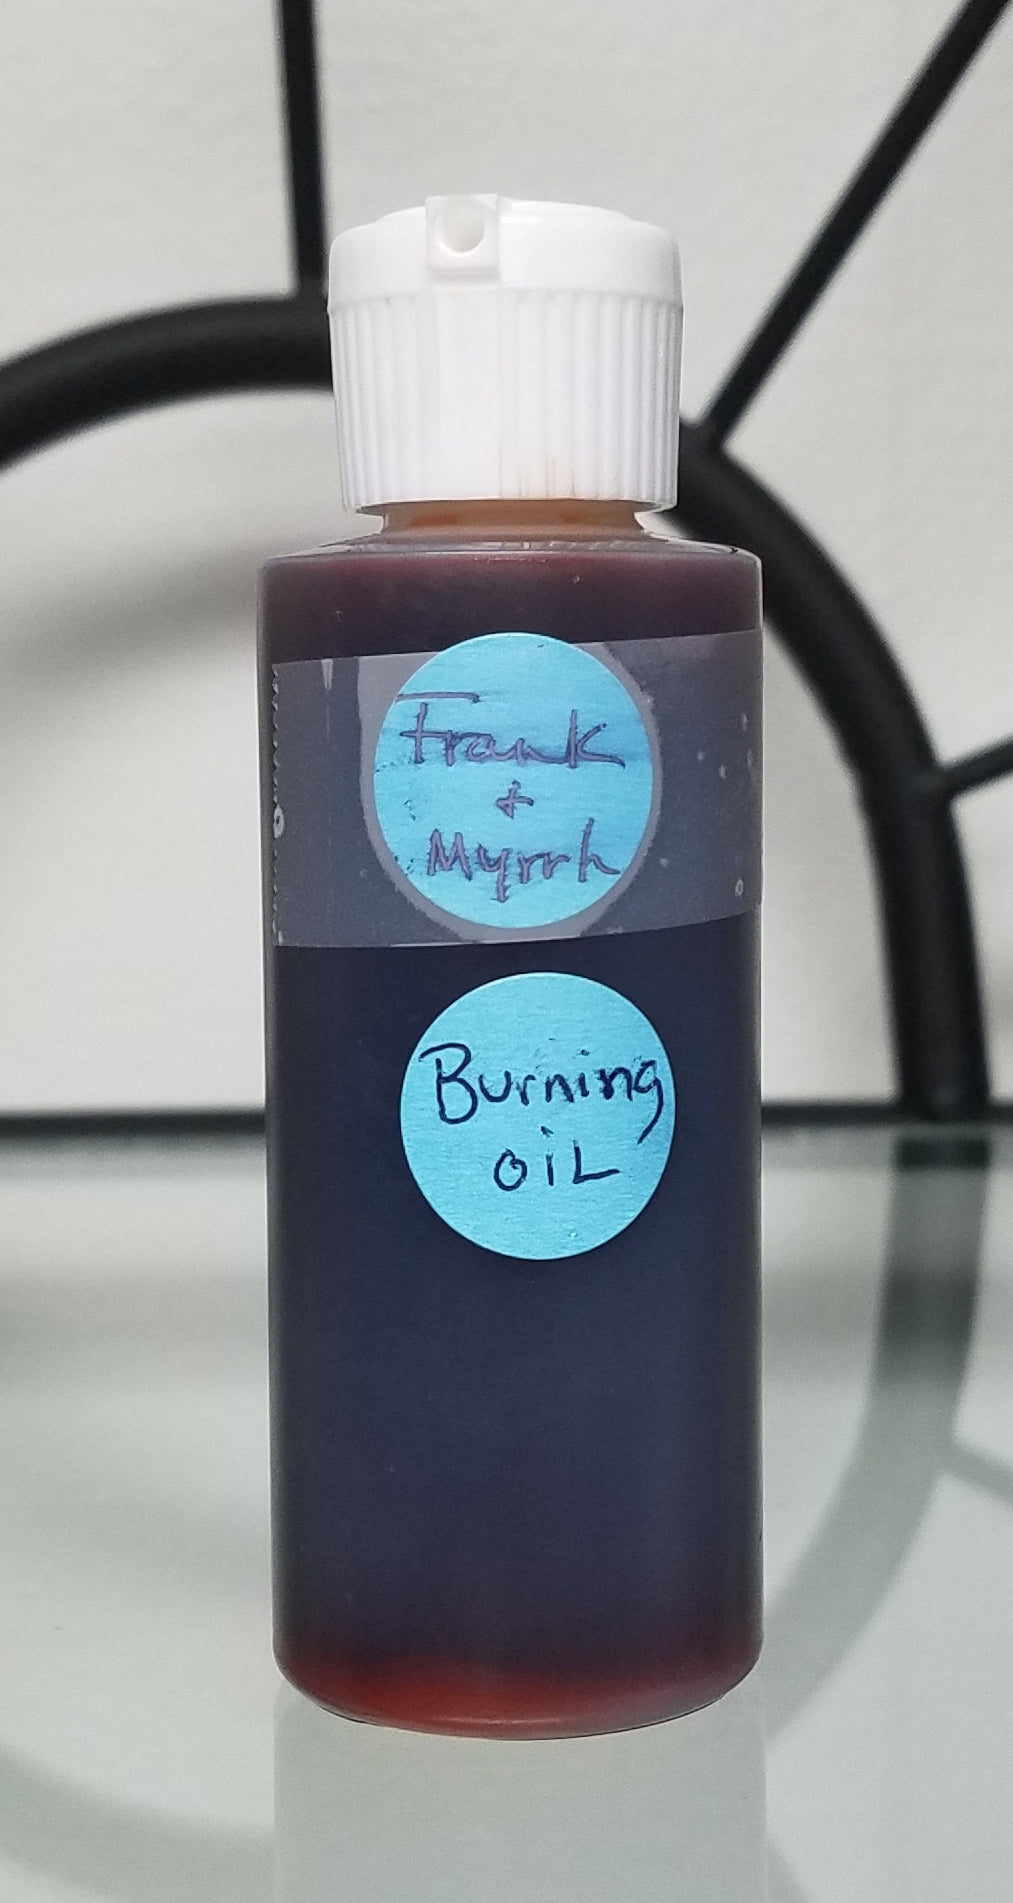 Burning oil 2oz. (IN STORE PURCHASE ONLY)